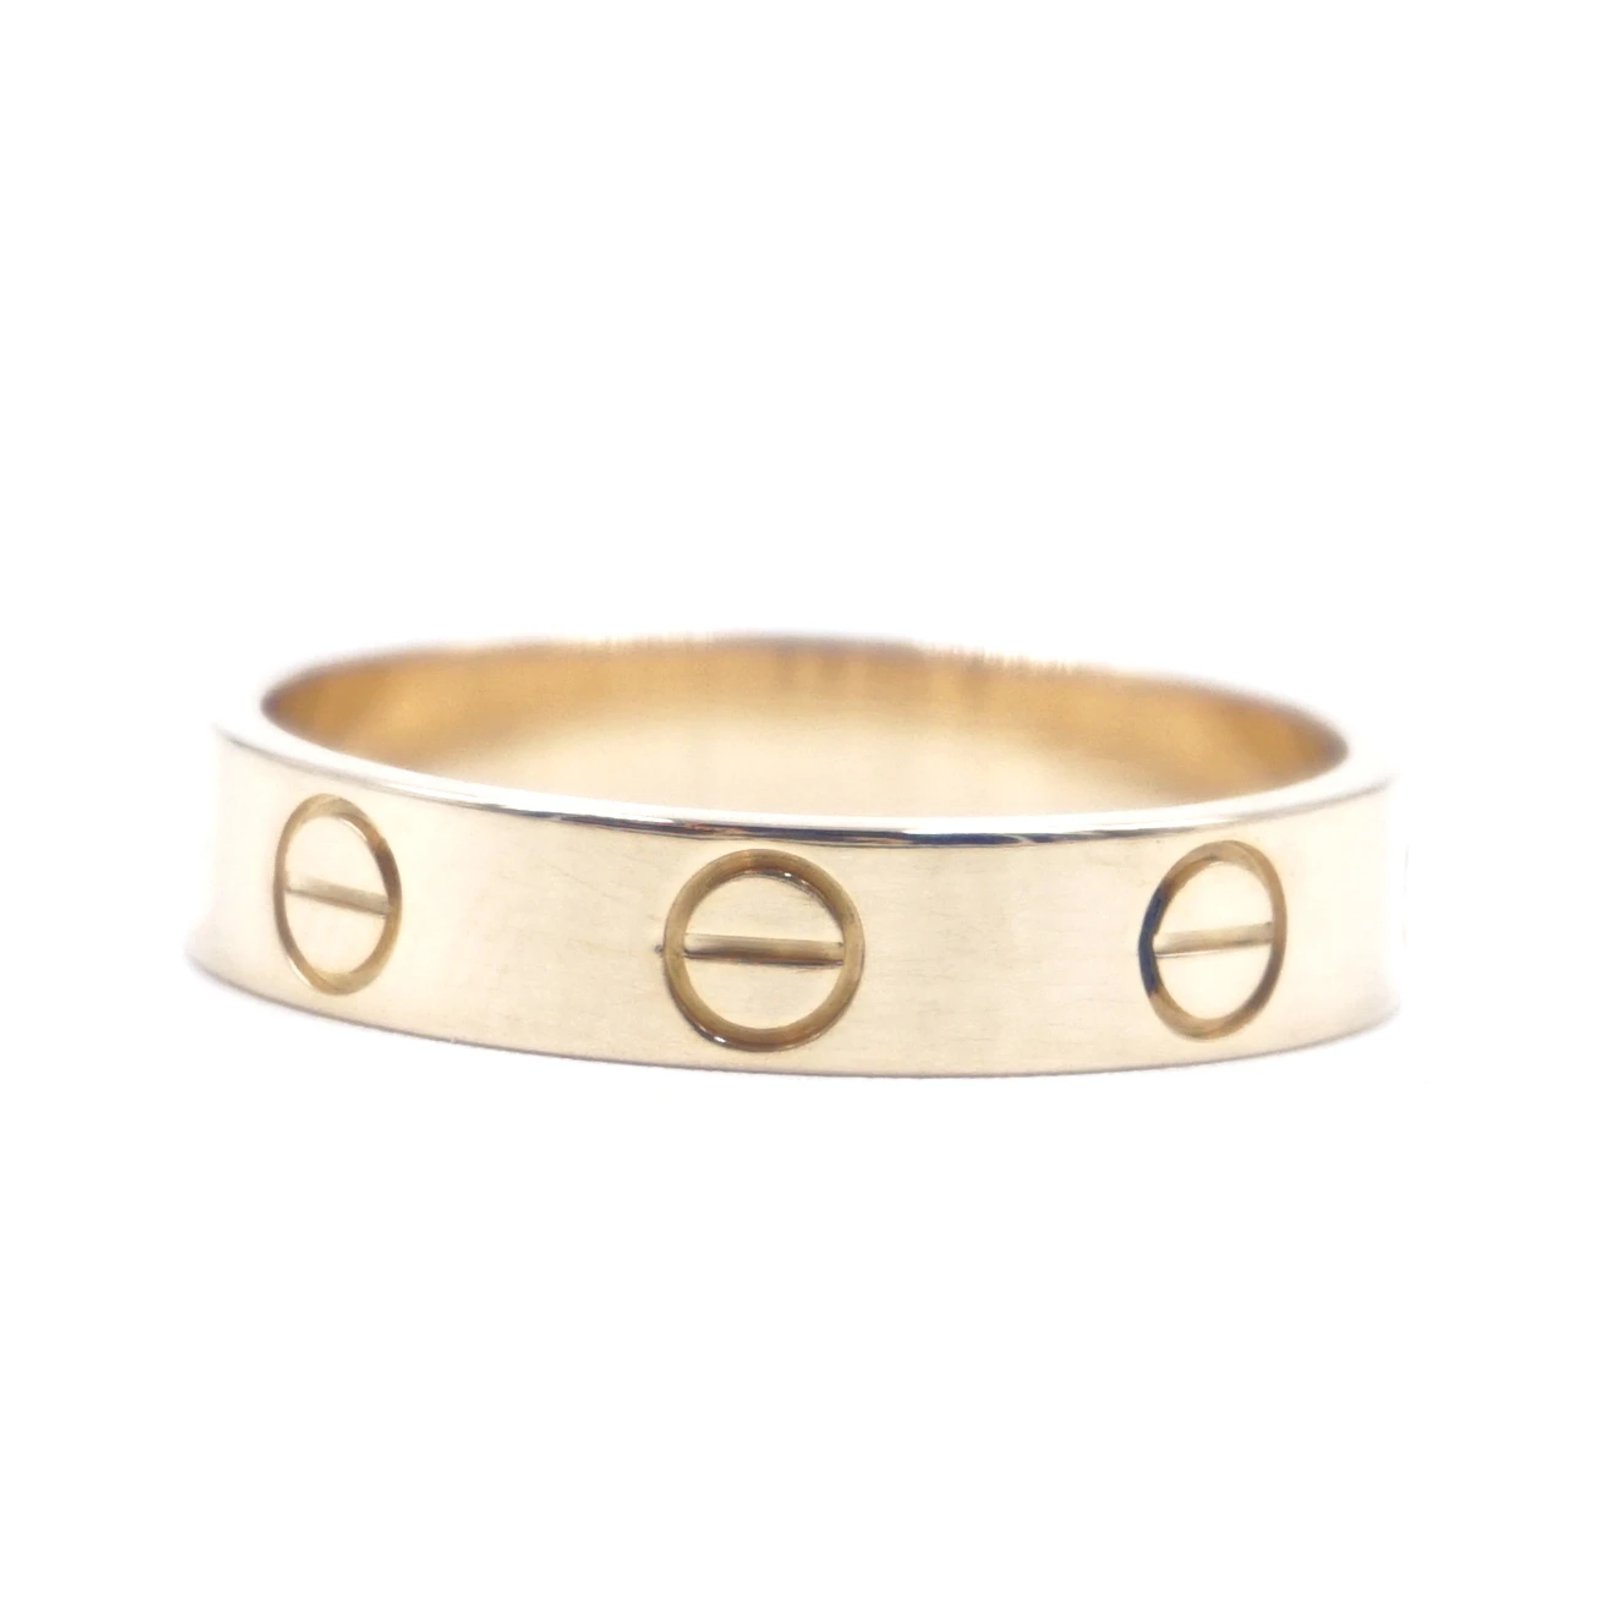 cartier band ring